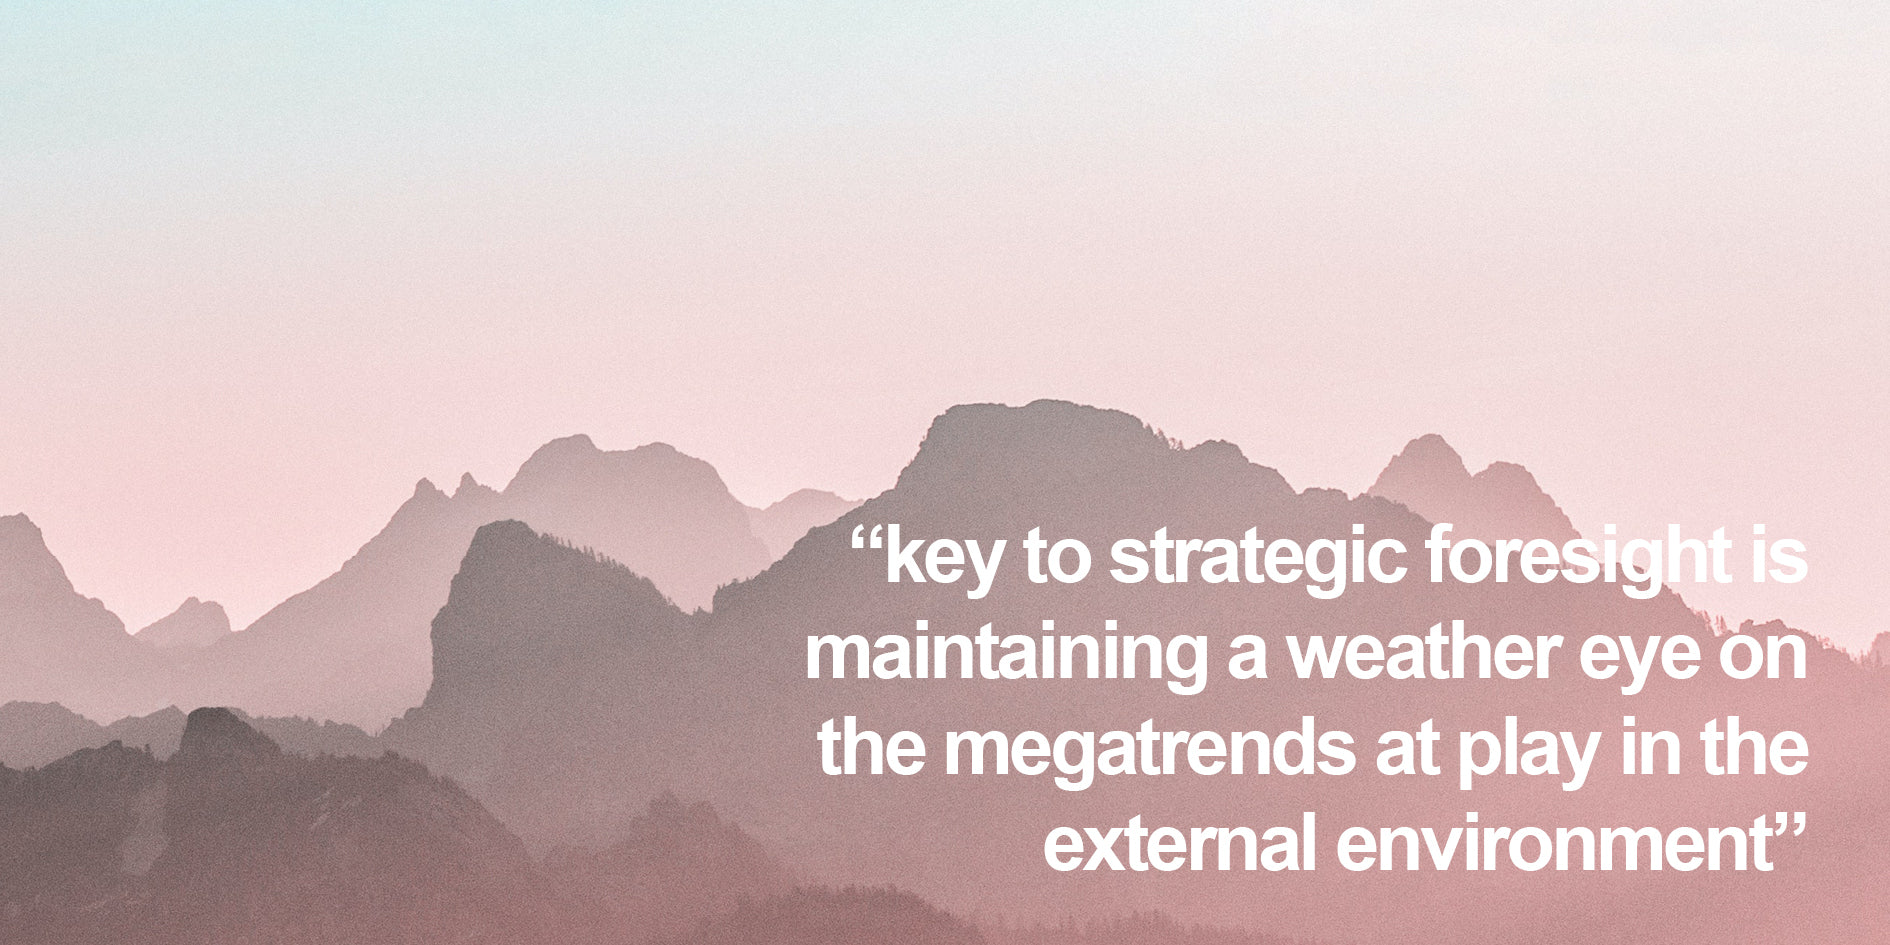 developing strategic foresight requires keeping a weather eye on megatrends